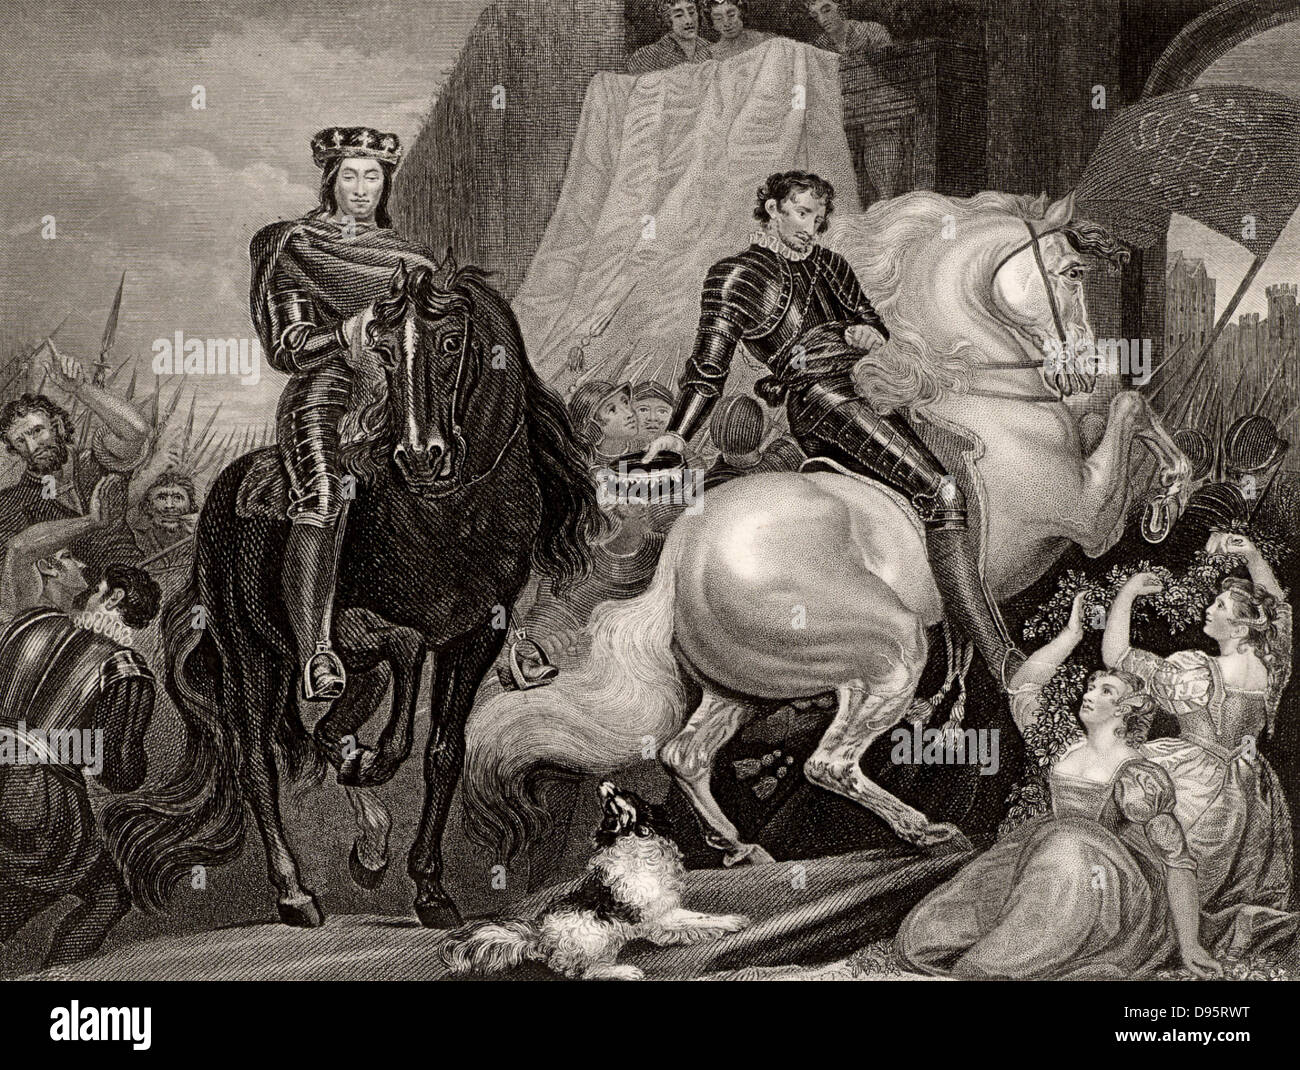 Richard II (1367-1400) king of England from 1377. Richard entering London, 14 June 1381, during the Peasants' Revolt after persuading men of Essex and Kent to return home. Engraving c1860. Stock Photo